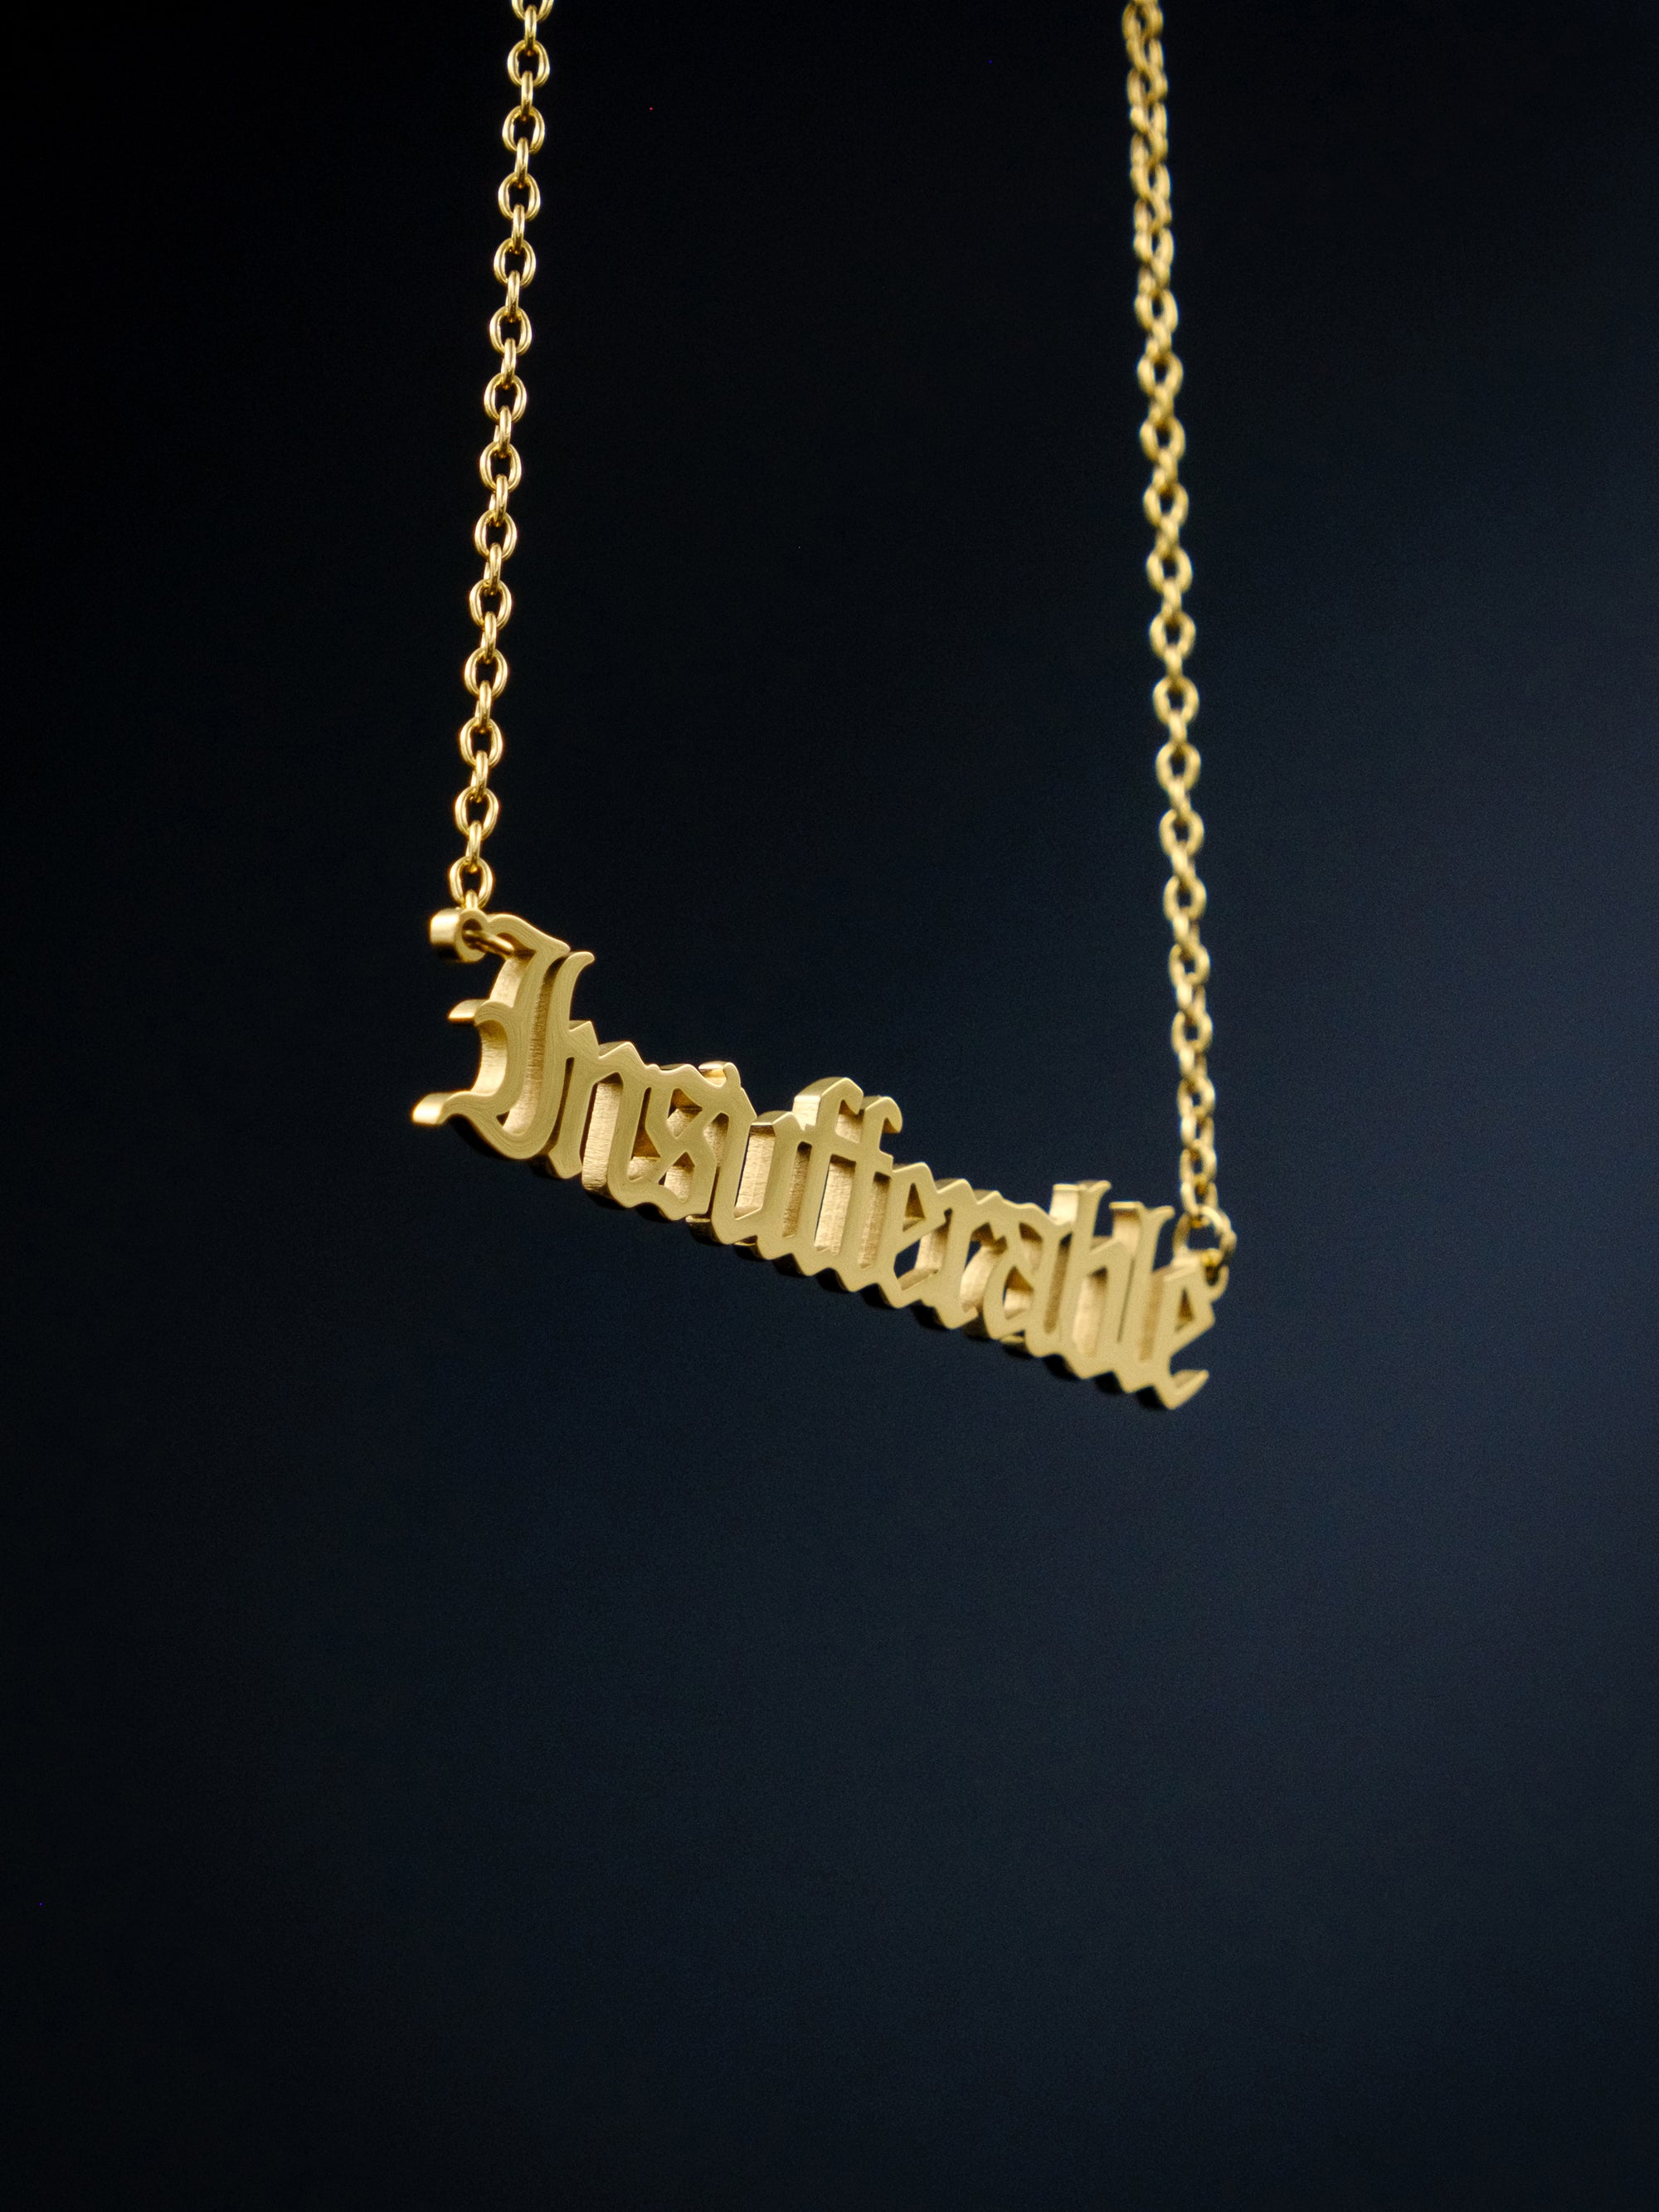 gold nameplate style necklace against a black background reads "insufferable" in old english style font